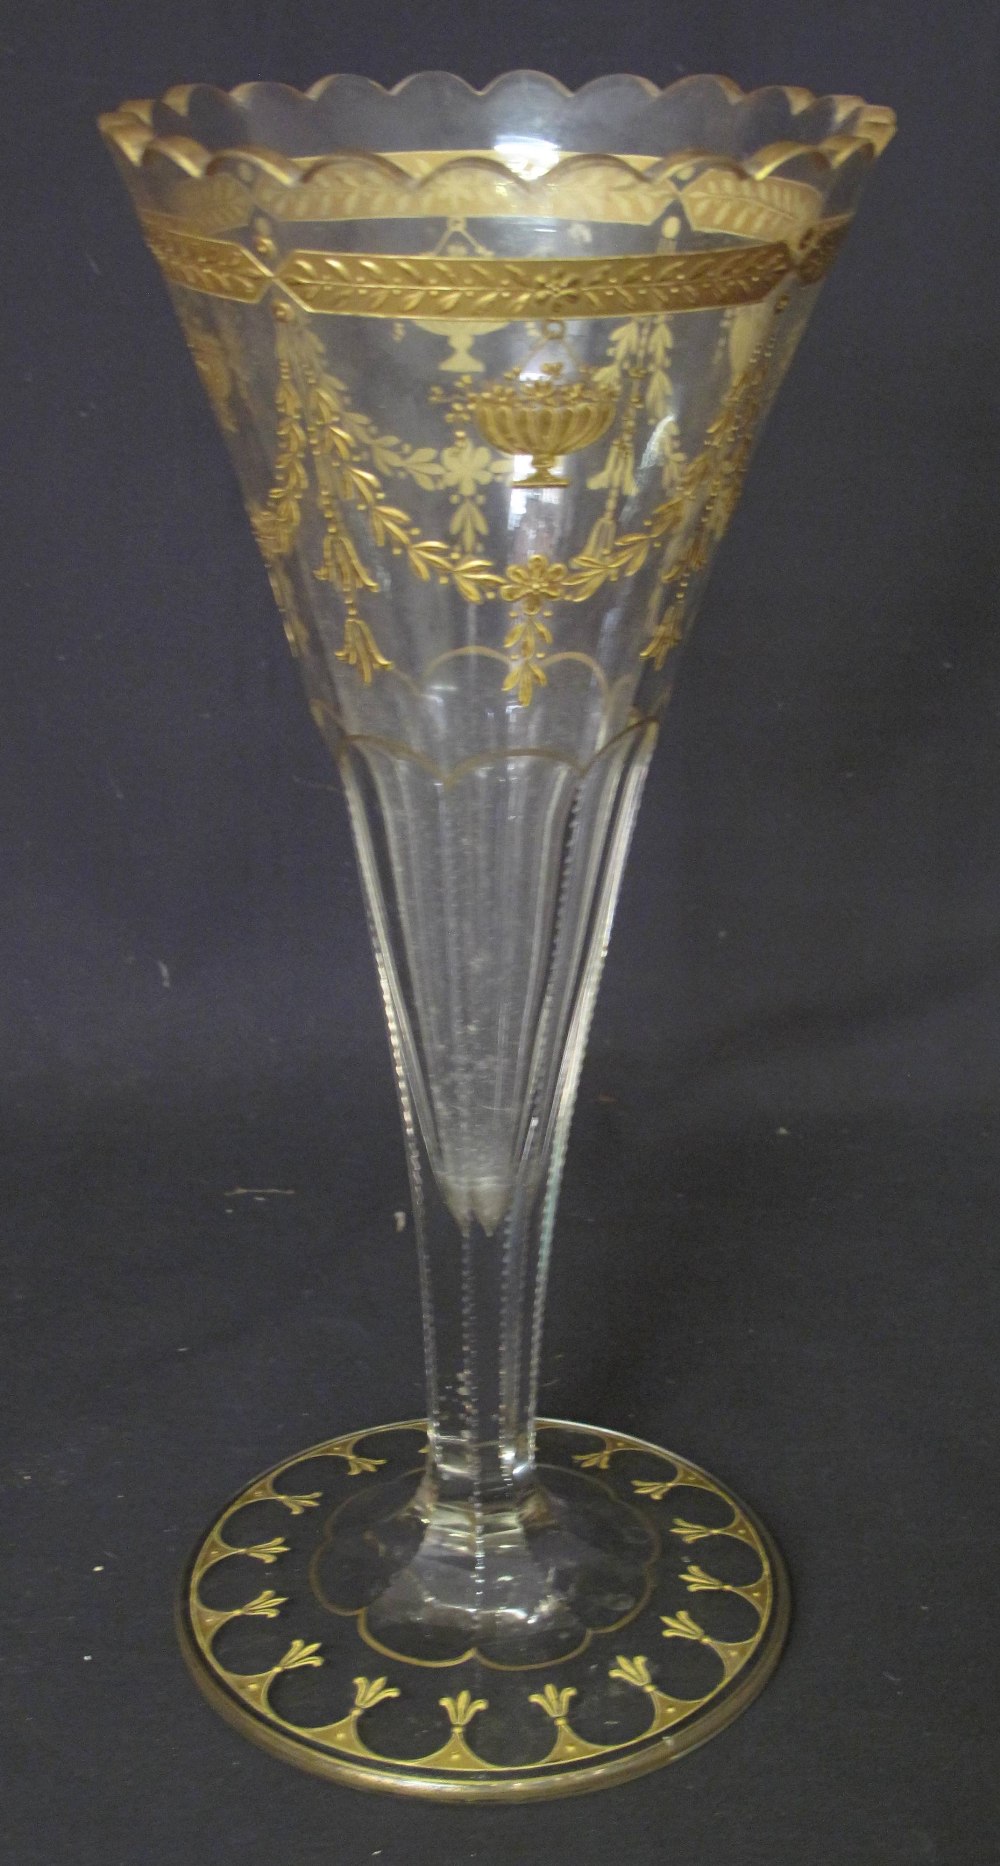 LARGE 19TH CENTURY DECORATIVE LEAD CRYSTAL GLASS FLUTE SHAPED VASE with petalled rim and slice cut,